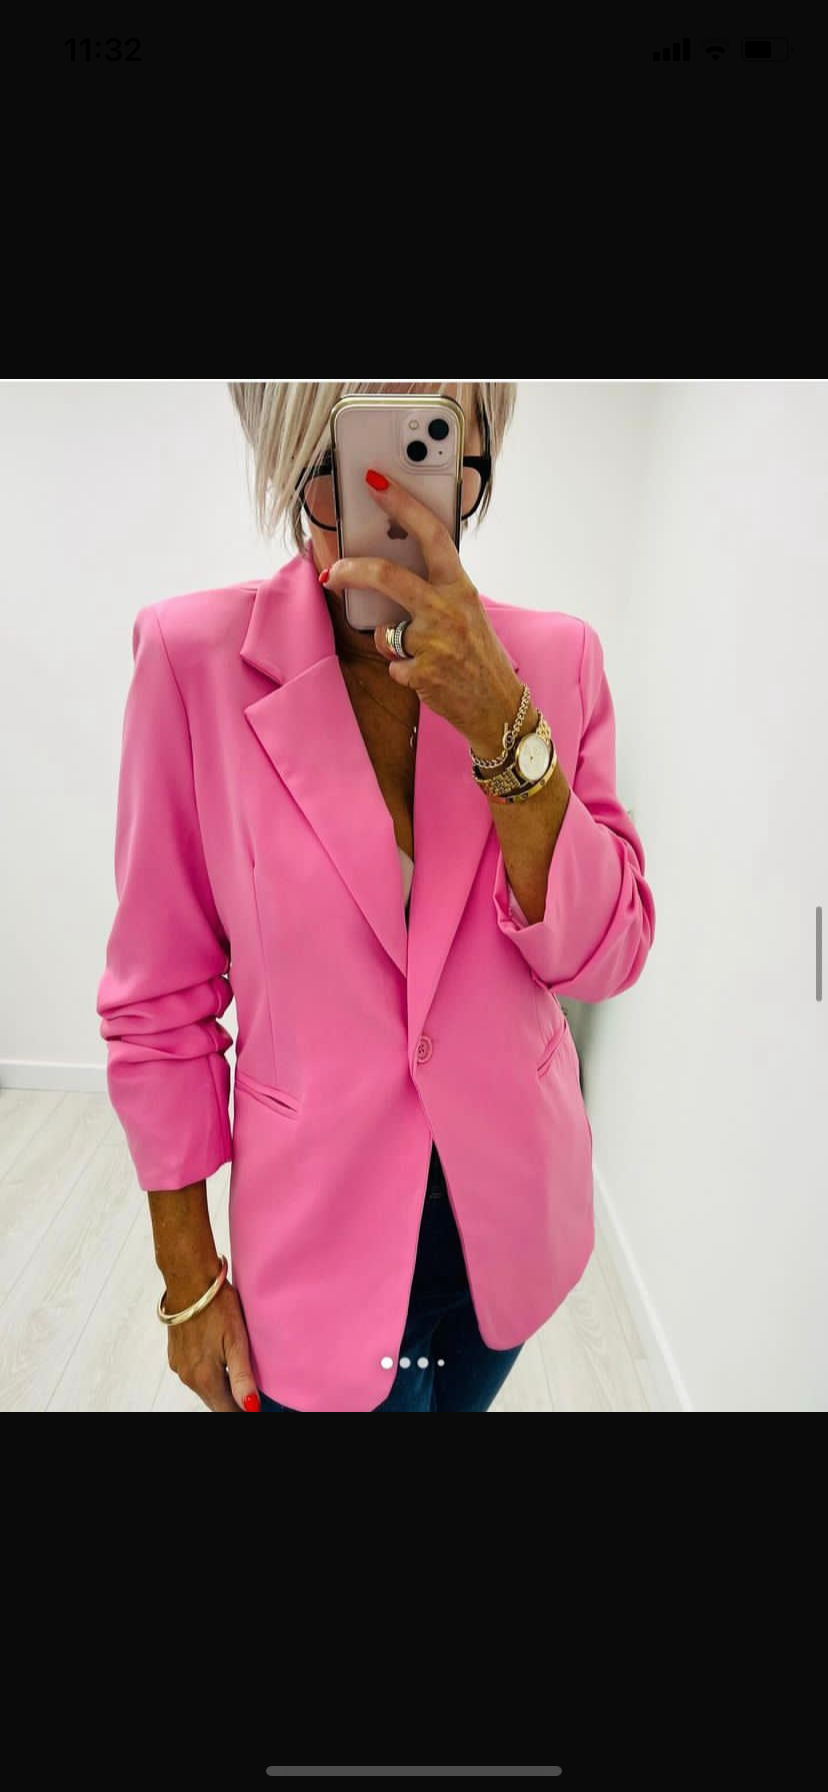 Bethany pink ruched blazer is